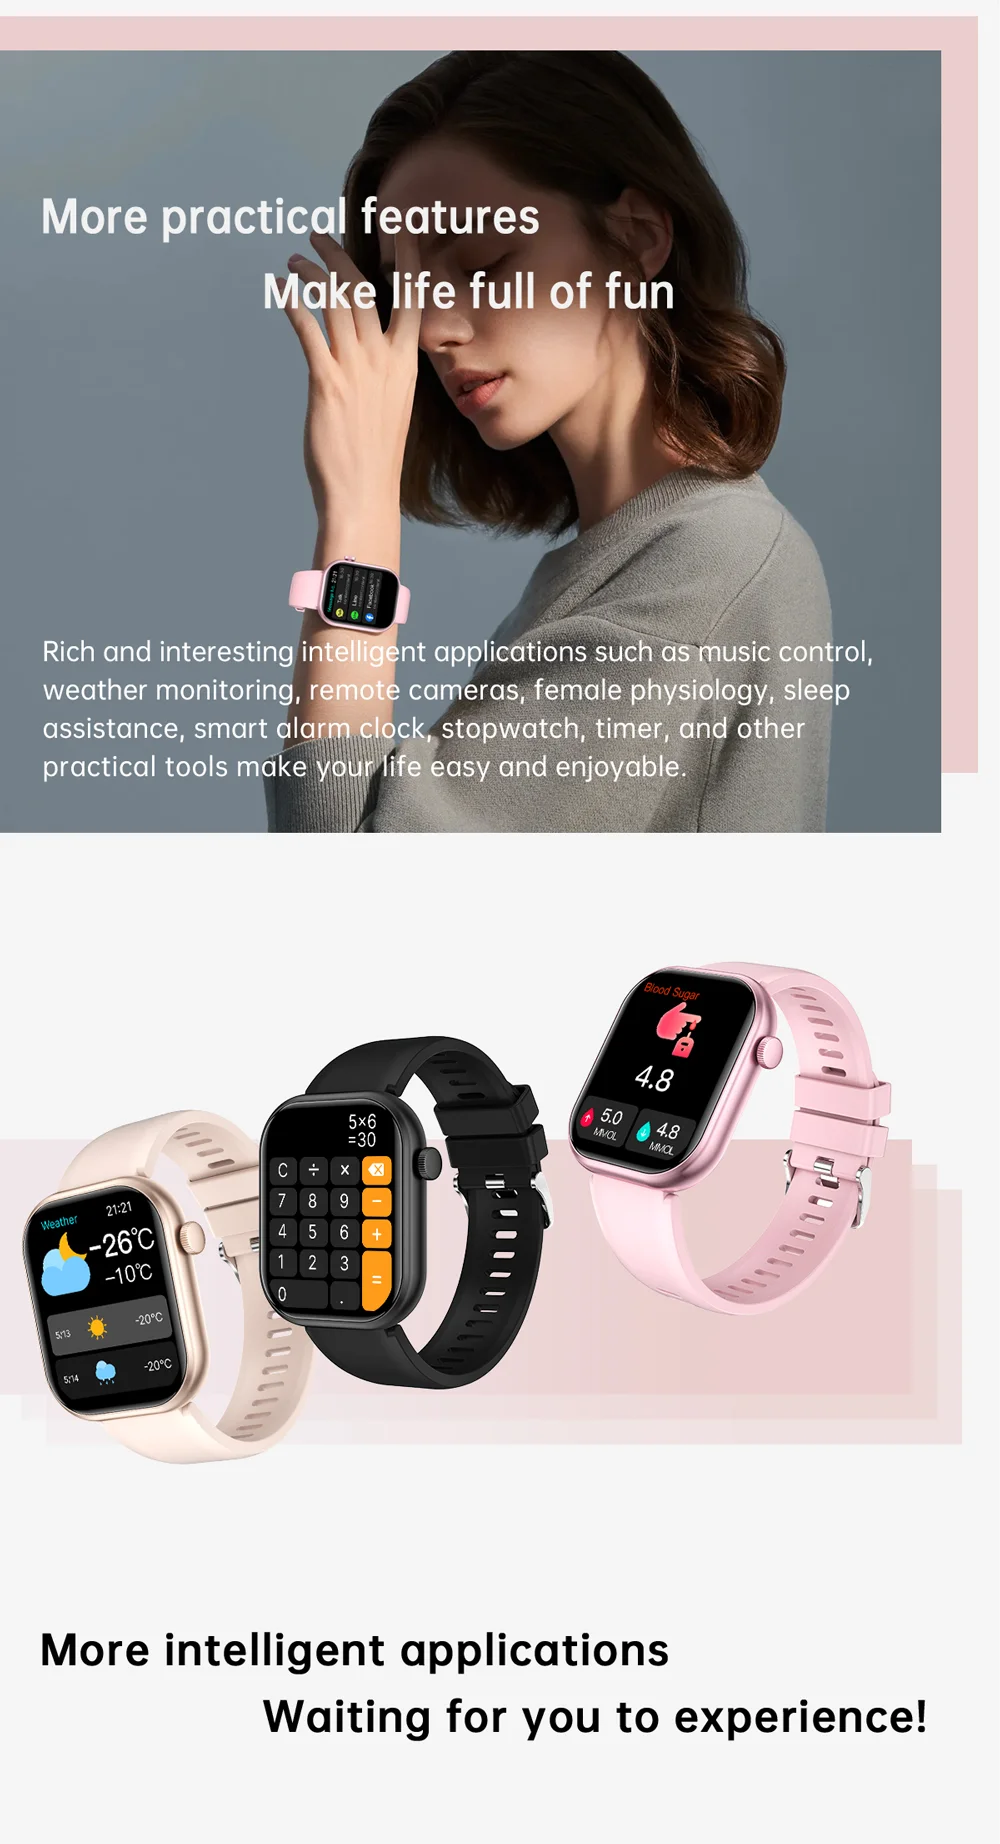 Sa75a0142facf493bbc4b84dbeee8f4a4F Smart Watch Women Bluetooth Call Blood Pressure Clock Body Temperature Sport Bracelet Waterproof Smartwatch Men For Android IOS